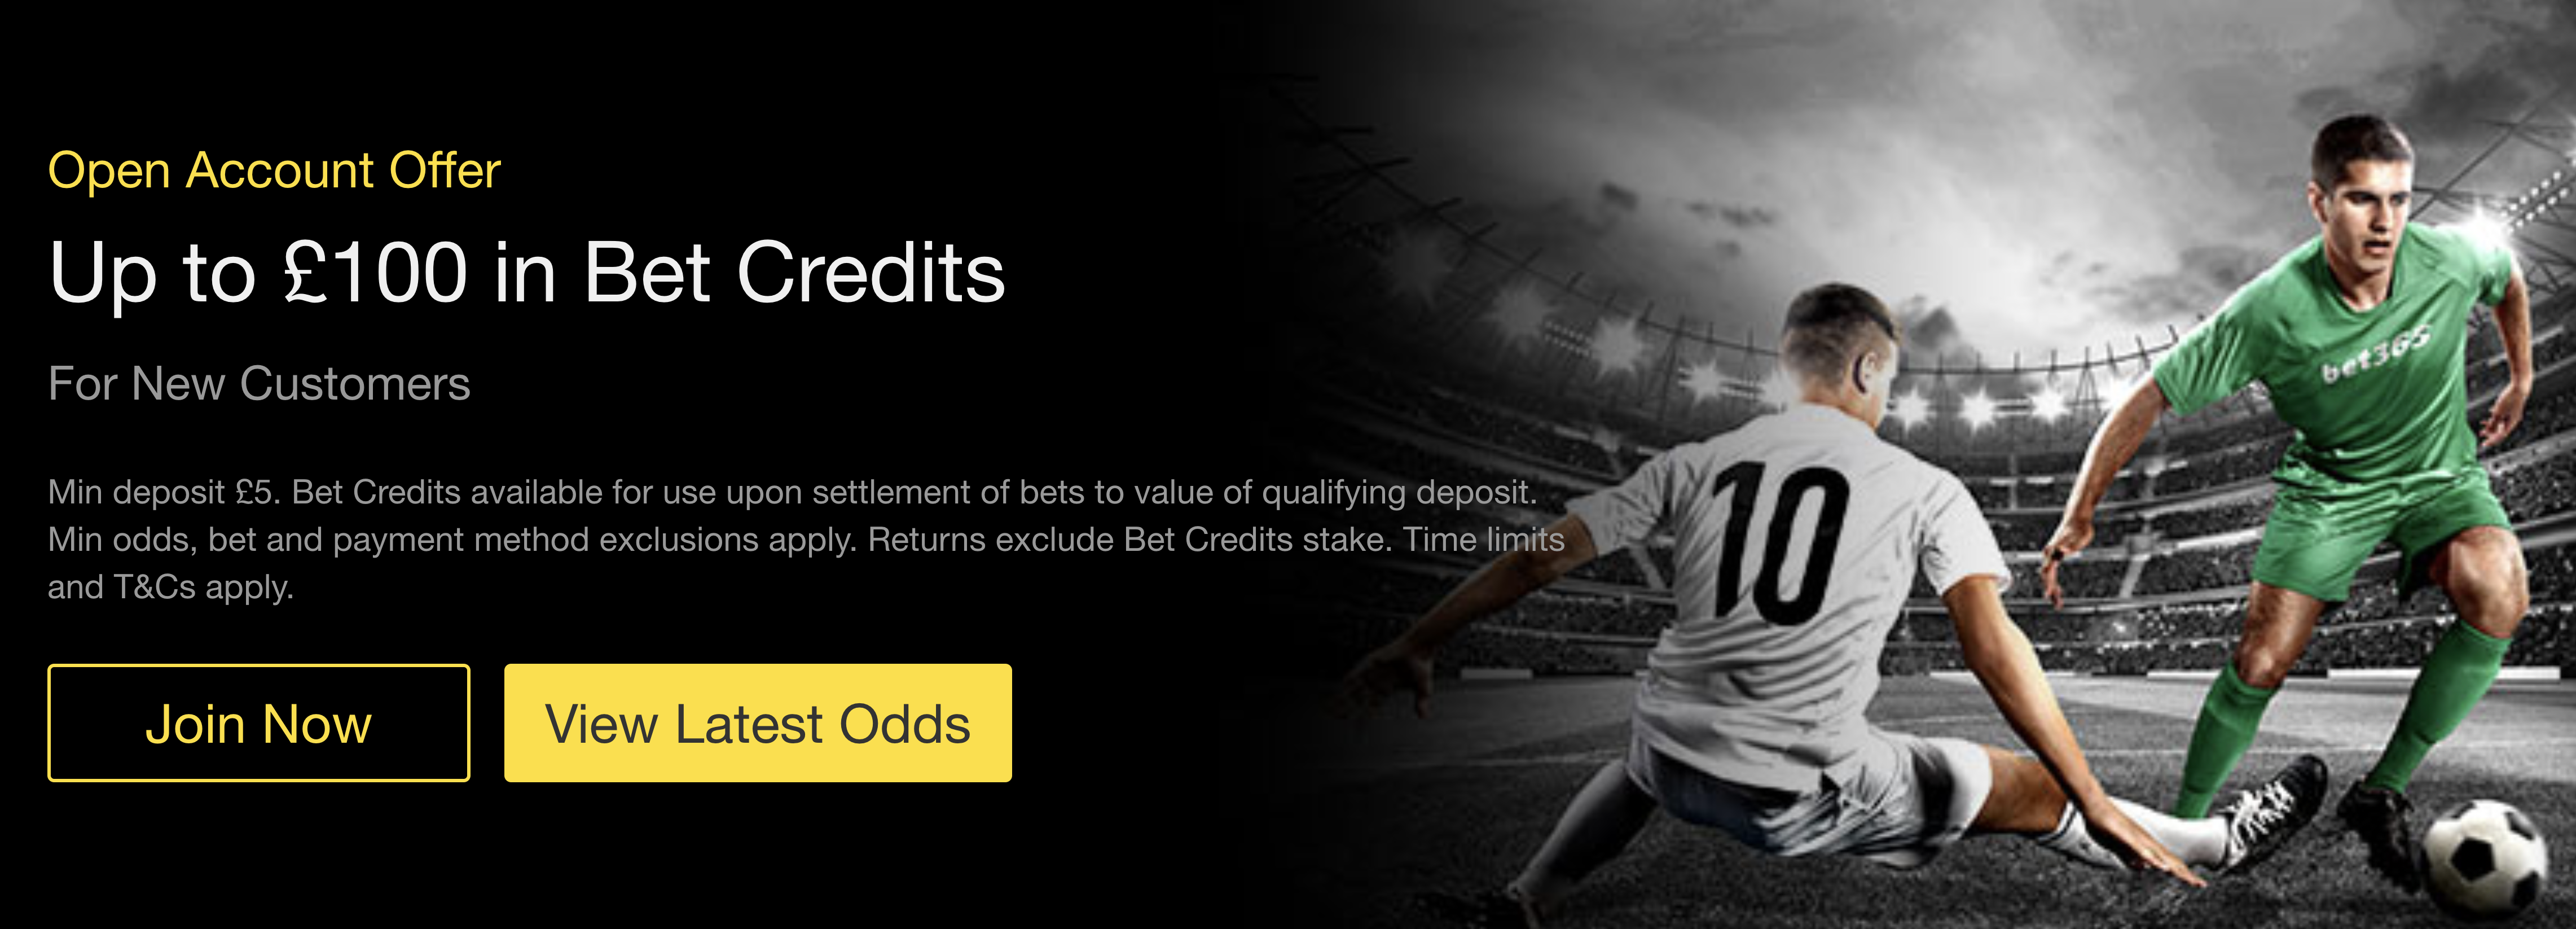 best offers for betting sites